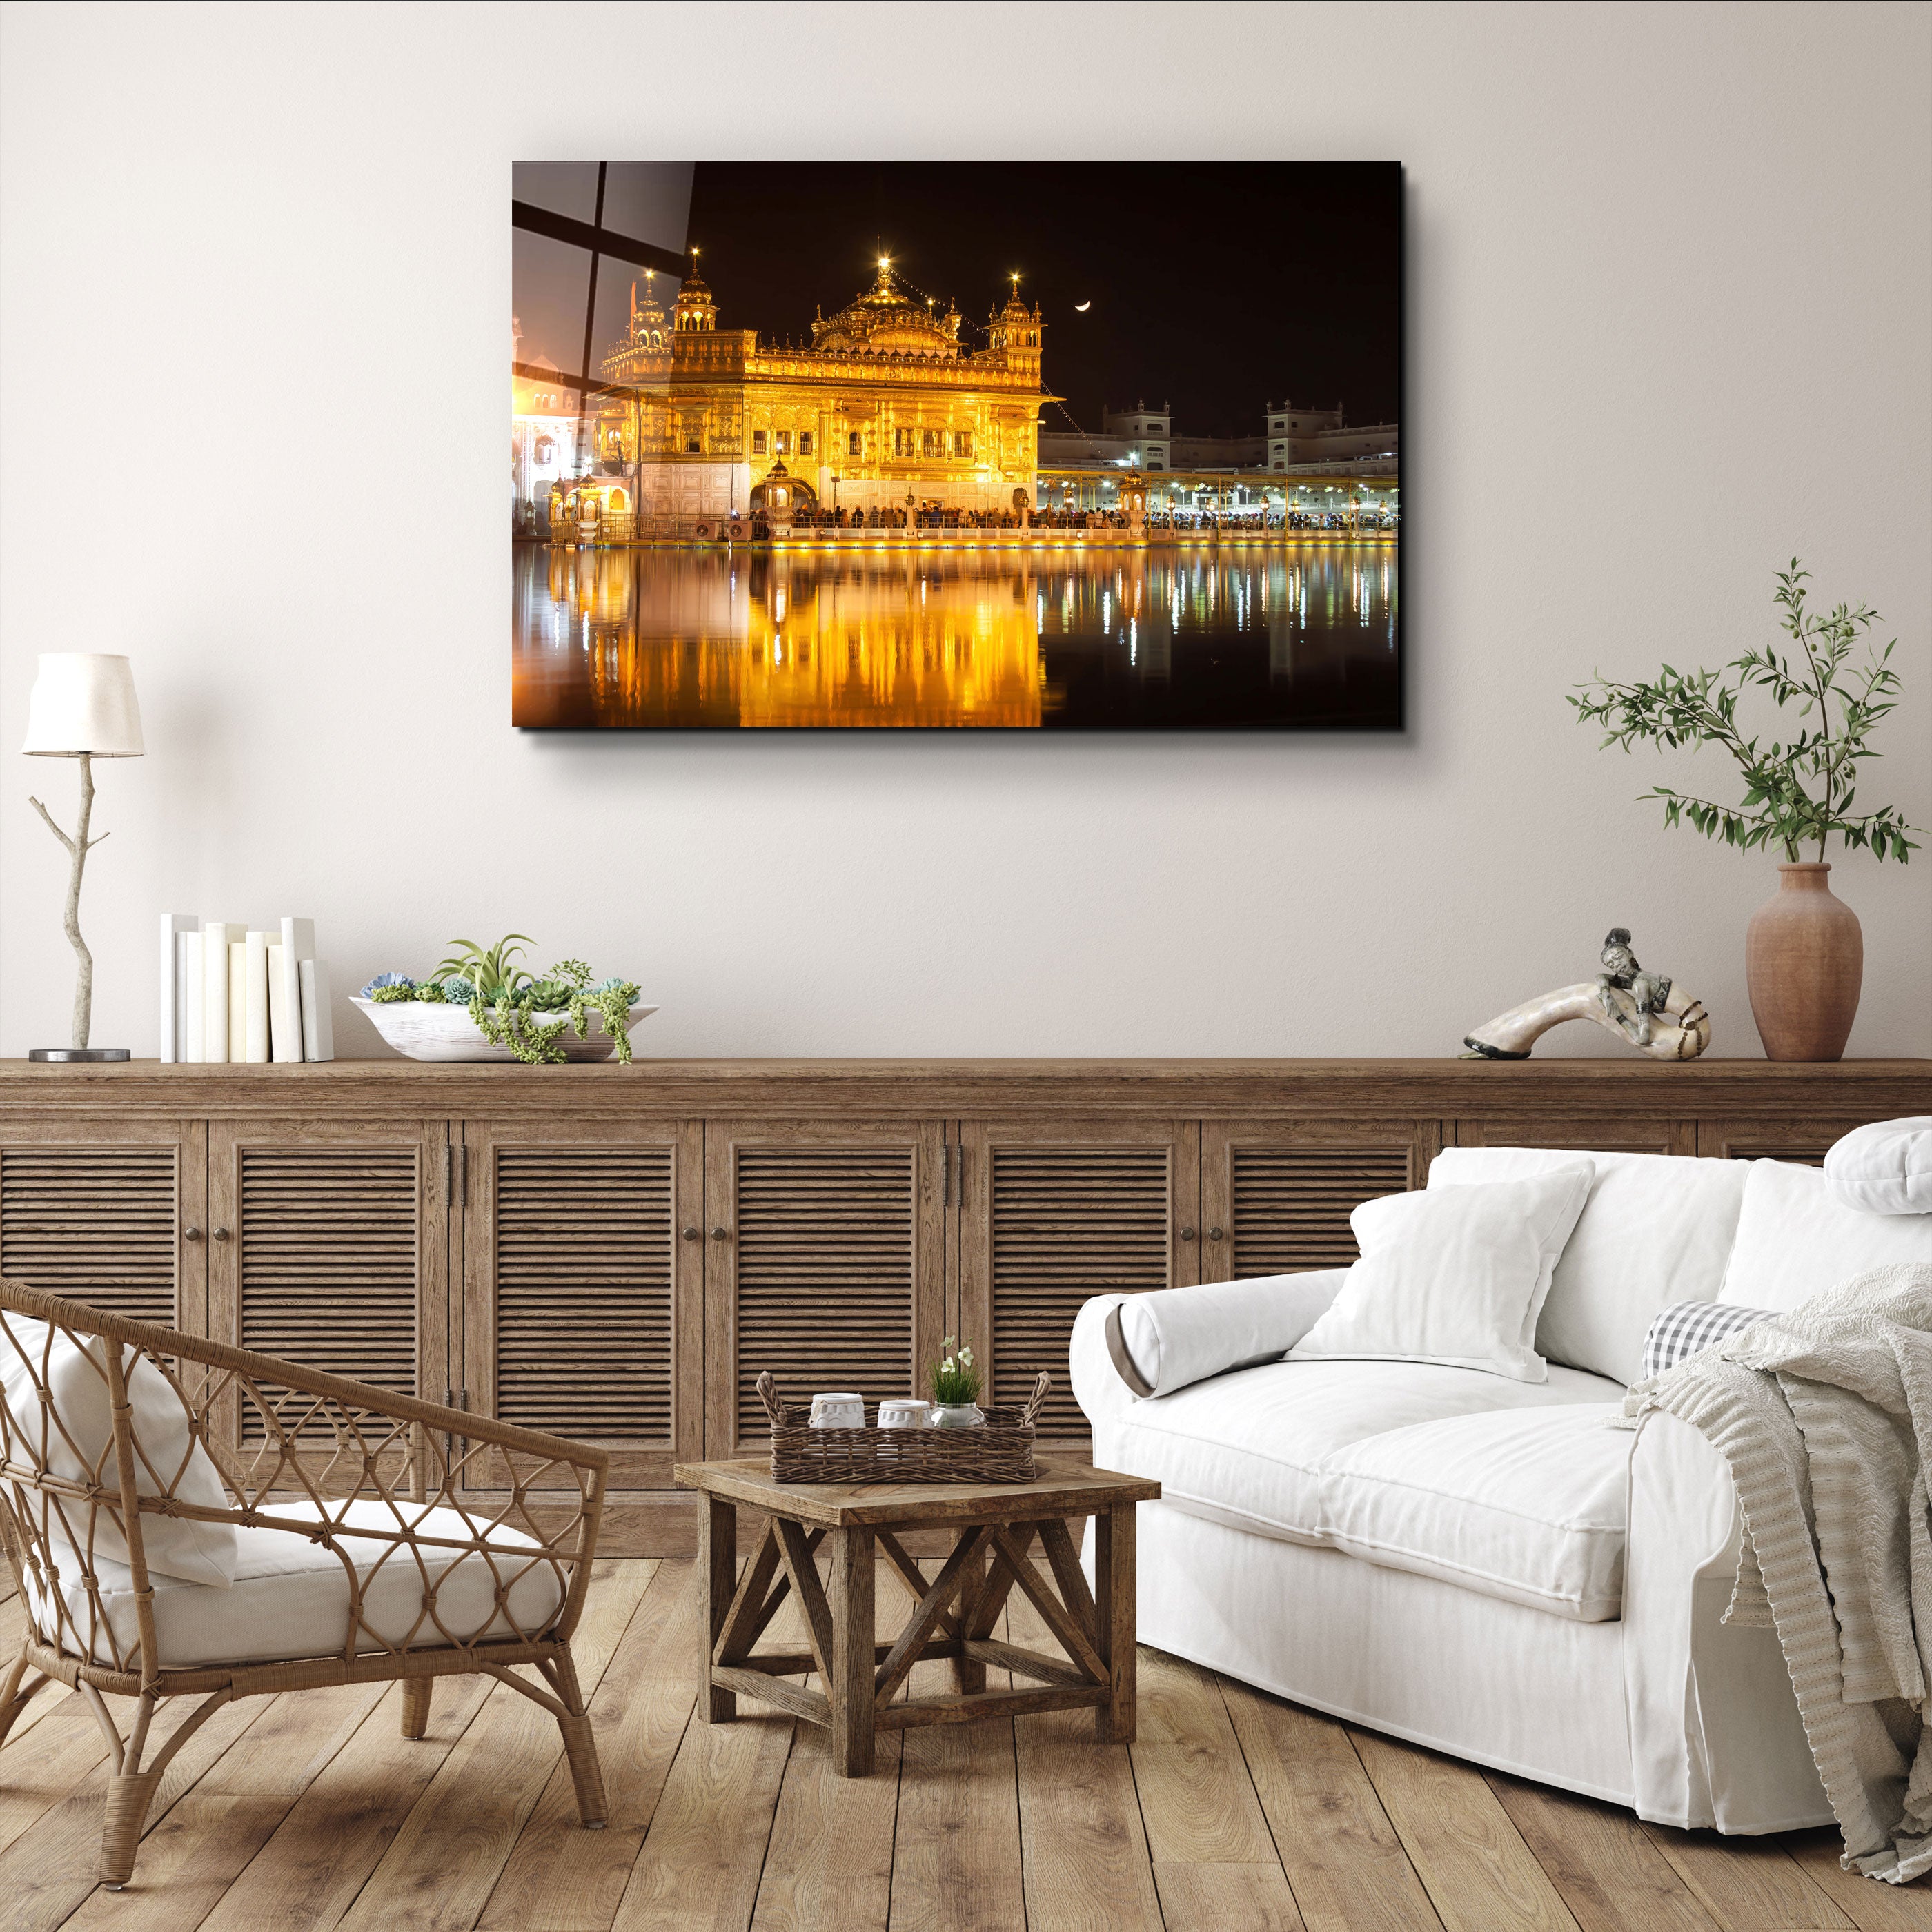 ・"The stunning Sikh Golden Temple in Amritsar, Punjab region in India"・Glass Wall Art